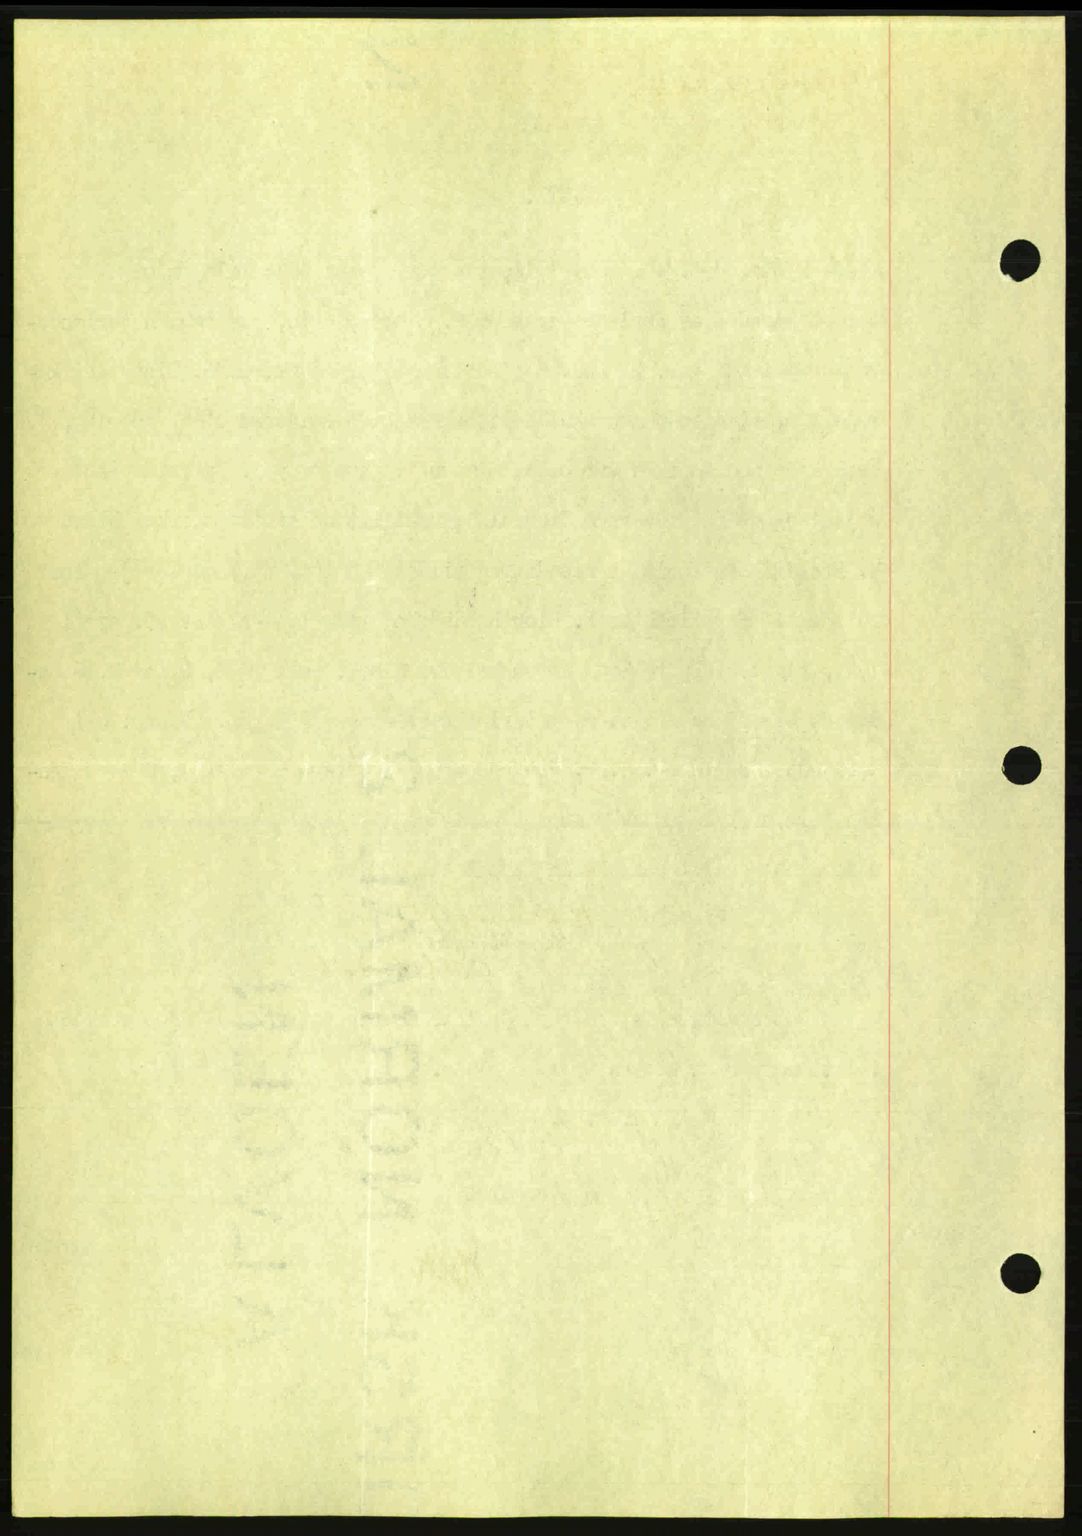 Indre Sogn tingrett, SAB/A-3301/1/G/Gb/Gba/L0030: Mortgage book no. 30, 1935-1937, Deed date: 28.01.1937